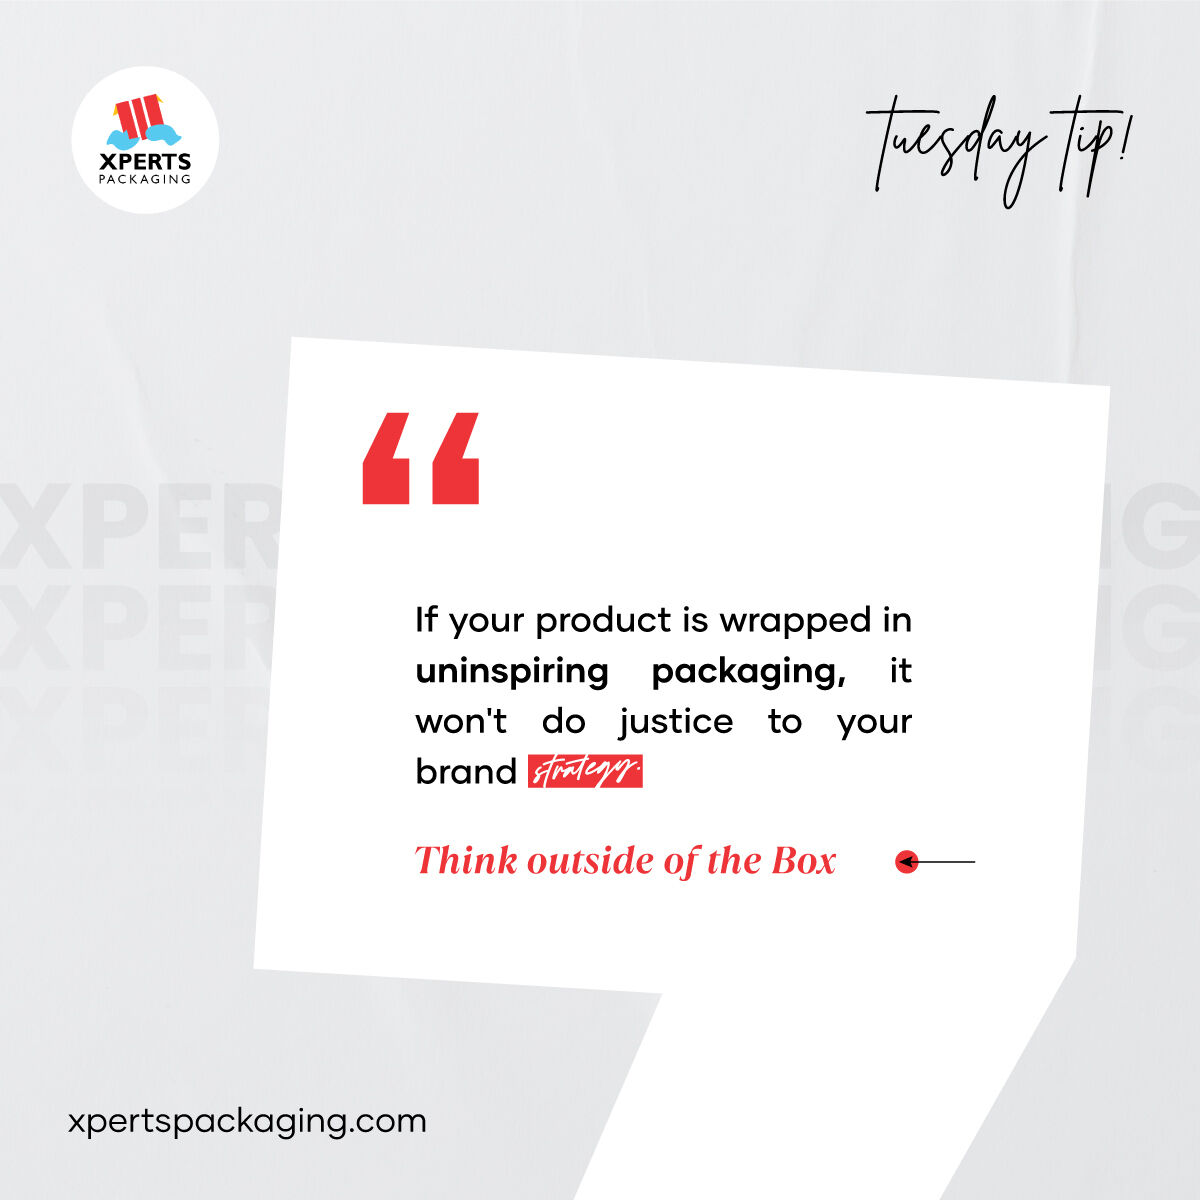 🌟 Tuesday Tip: Elevate your brand with innovative packaging! 📦

💼 Let's brainstorm fresh ideas to make your product stand out! 💡

.
#XpertsPackaging
#PackagingIdeas #BrandStrategy
#Innovation #CreativeDesign
#PackagingDesign #BrandIdentity
#CreativePackaging #ProductPackaging